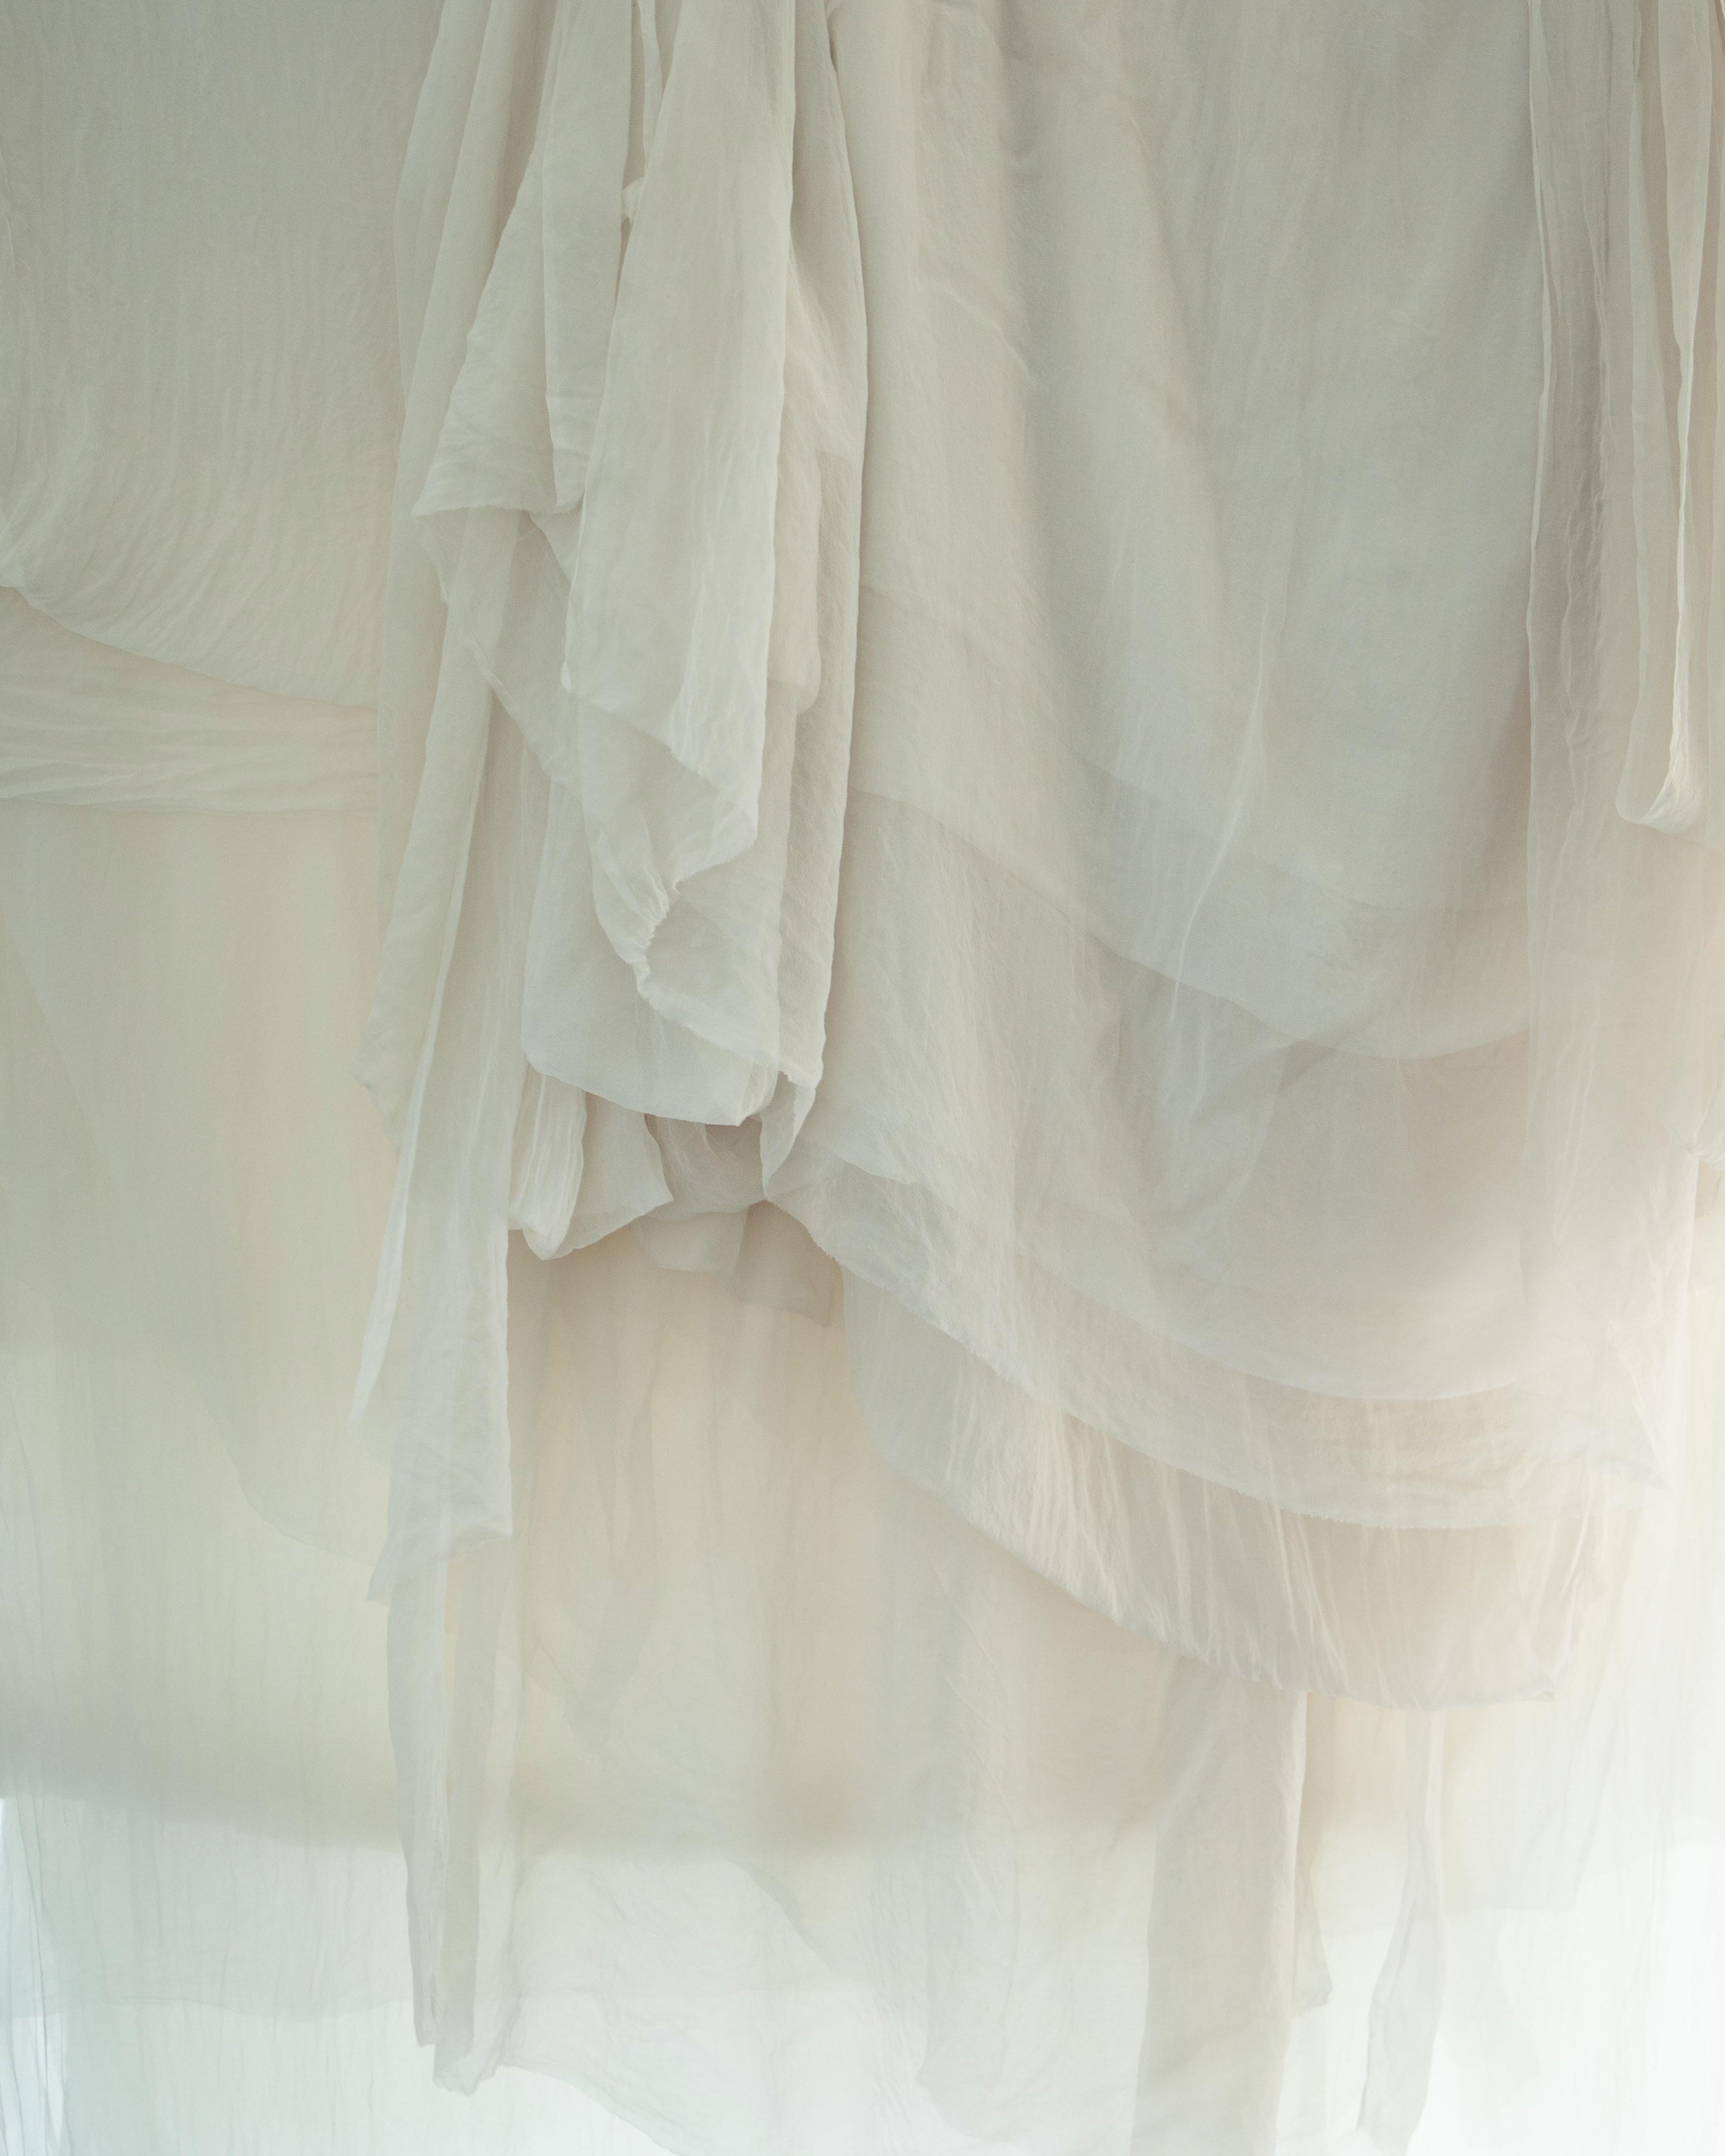 soft white sheer silk hanging in layers with light shining through